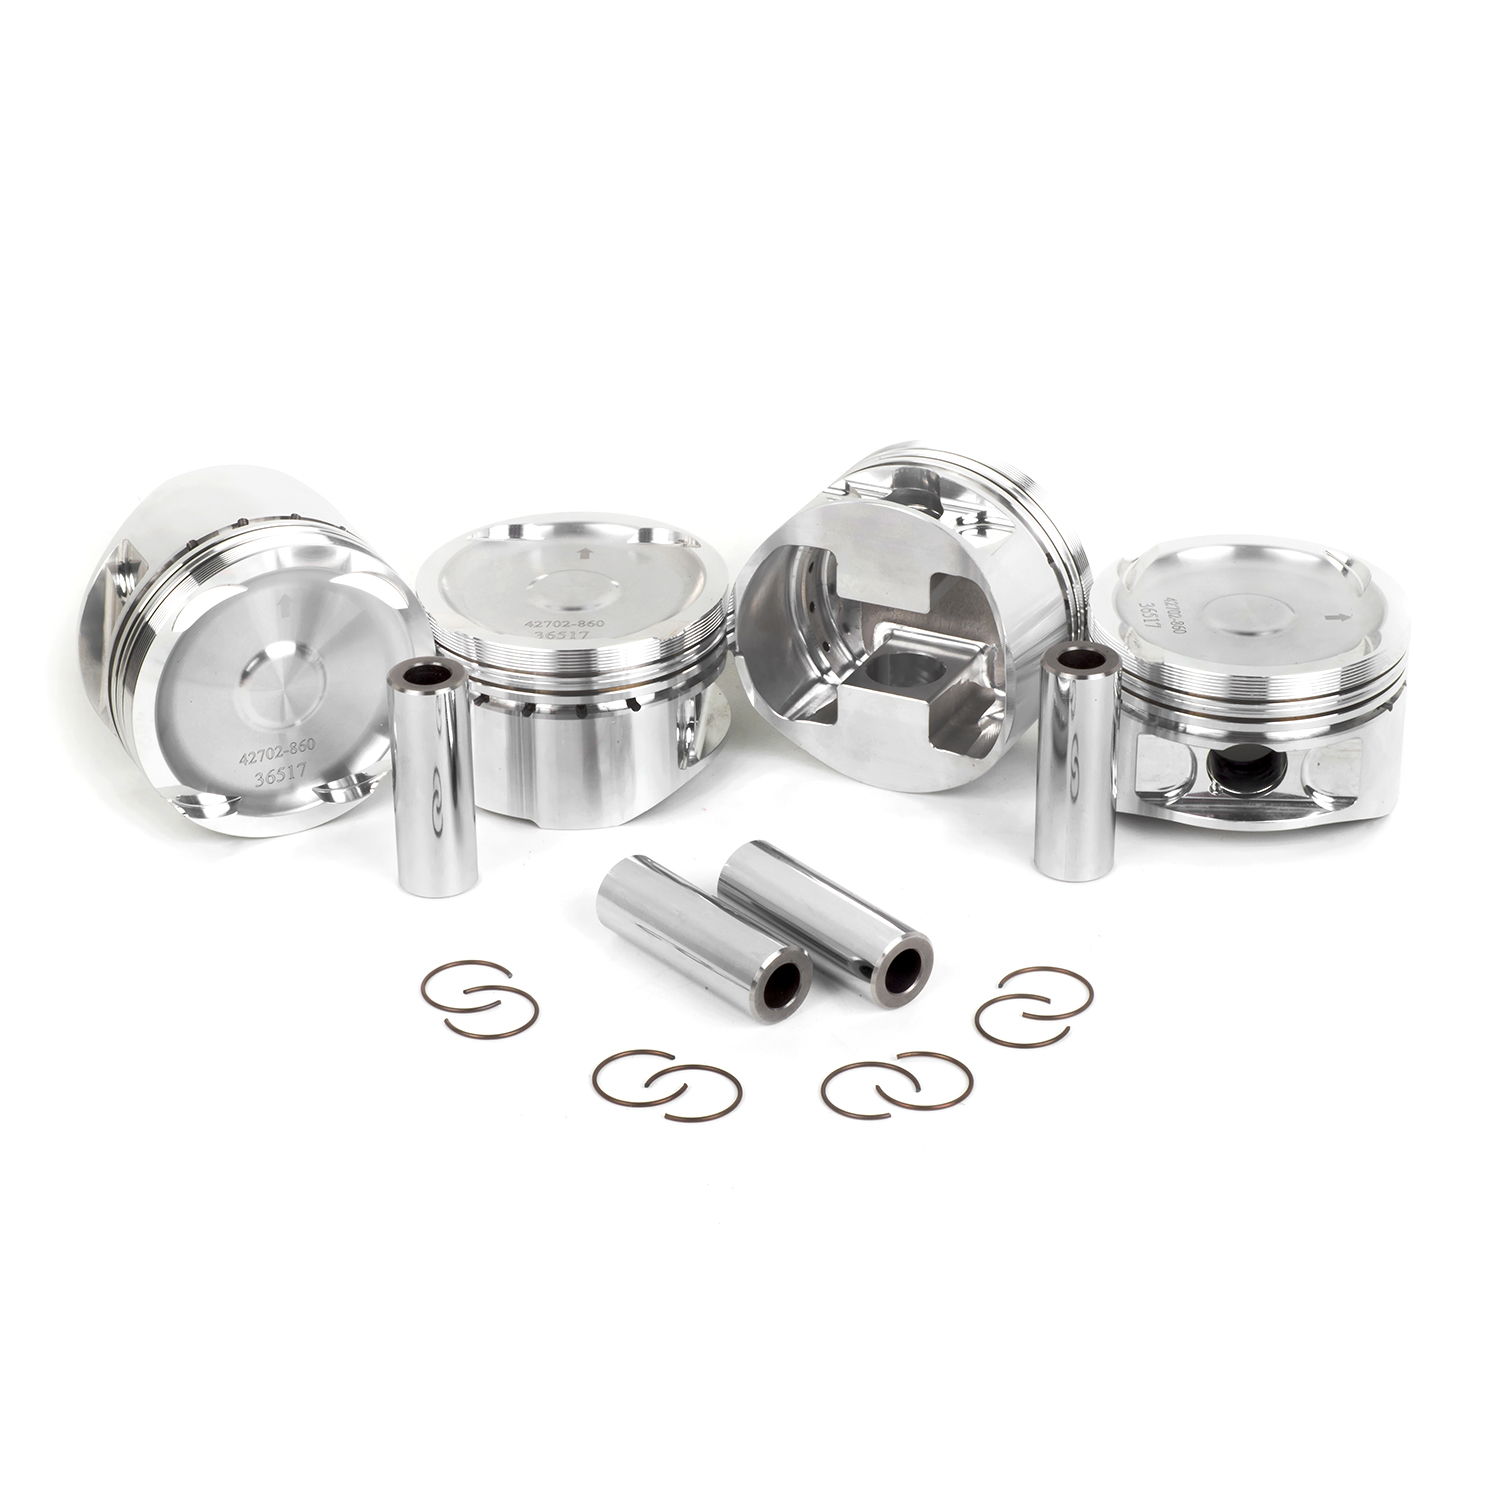 Opel 2.0L 16v Set of forget pistons for Opel / Vauxhall 2,0 16V